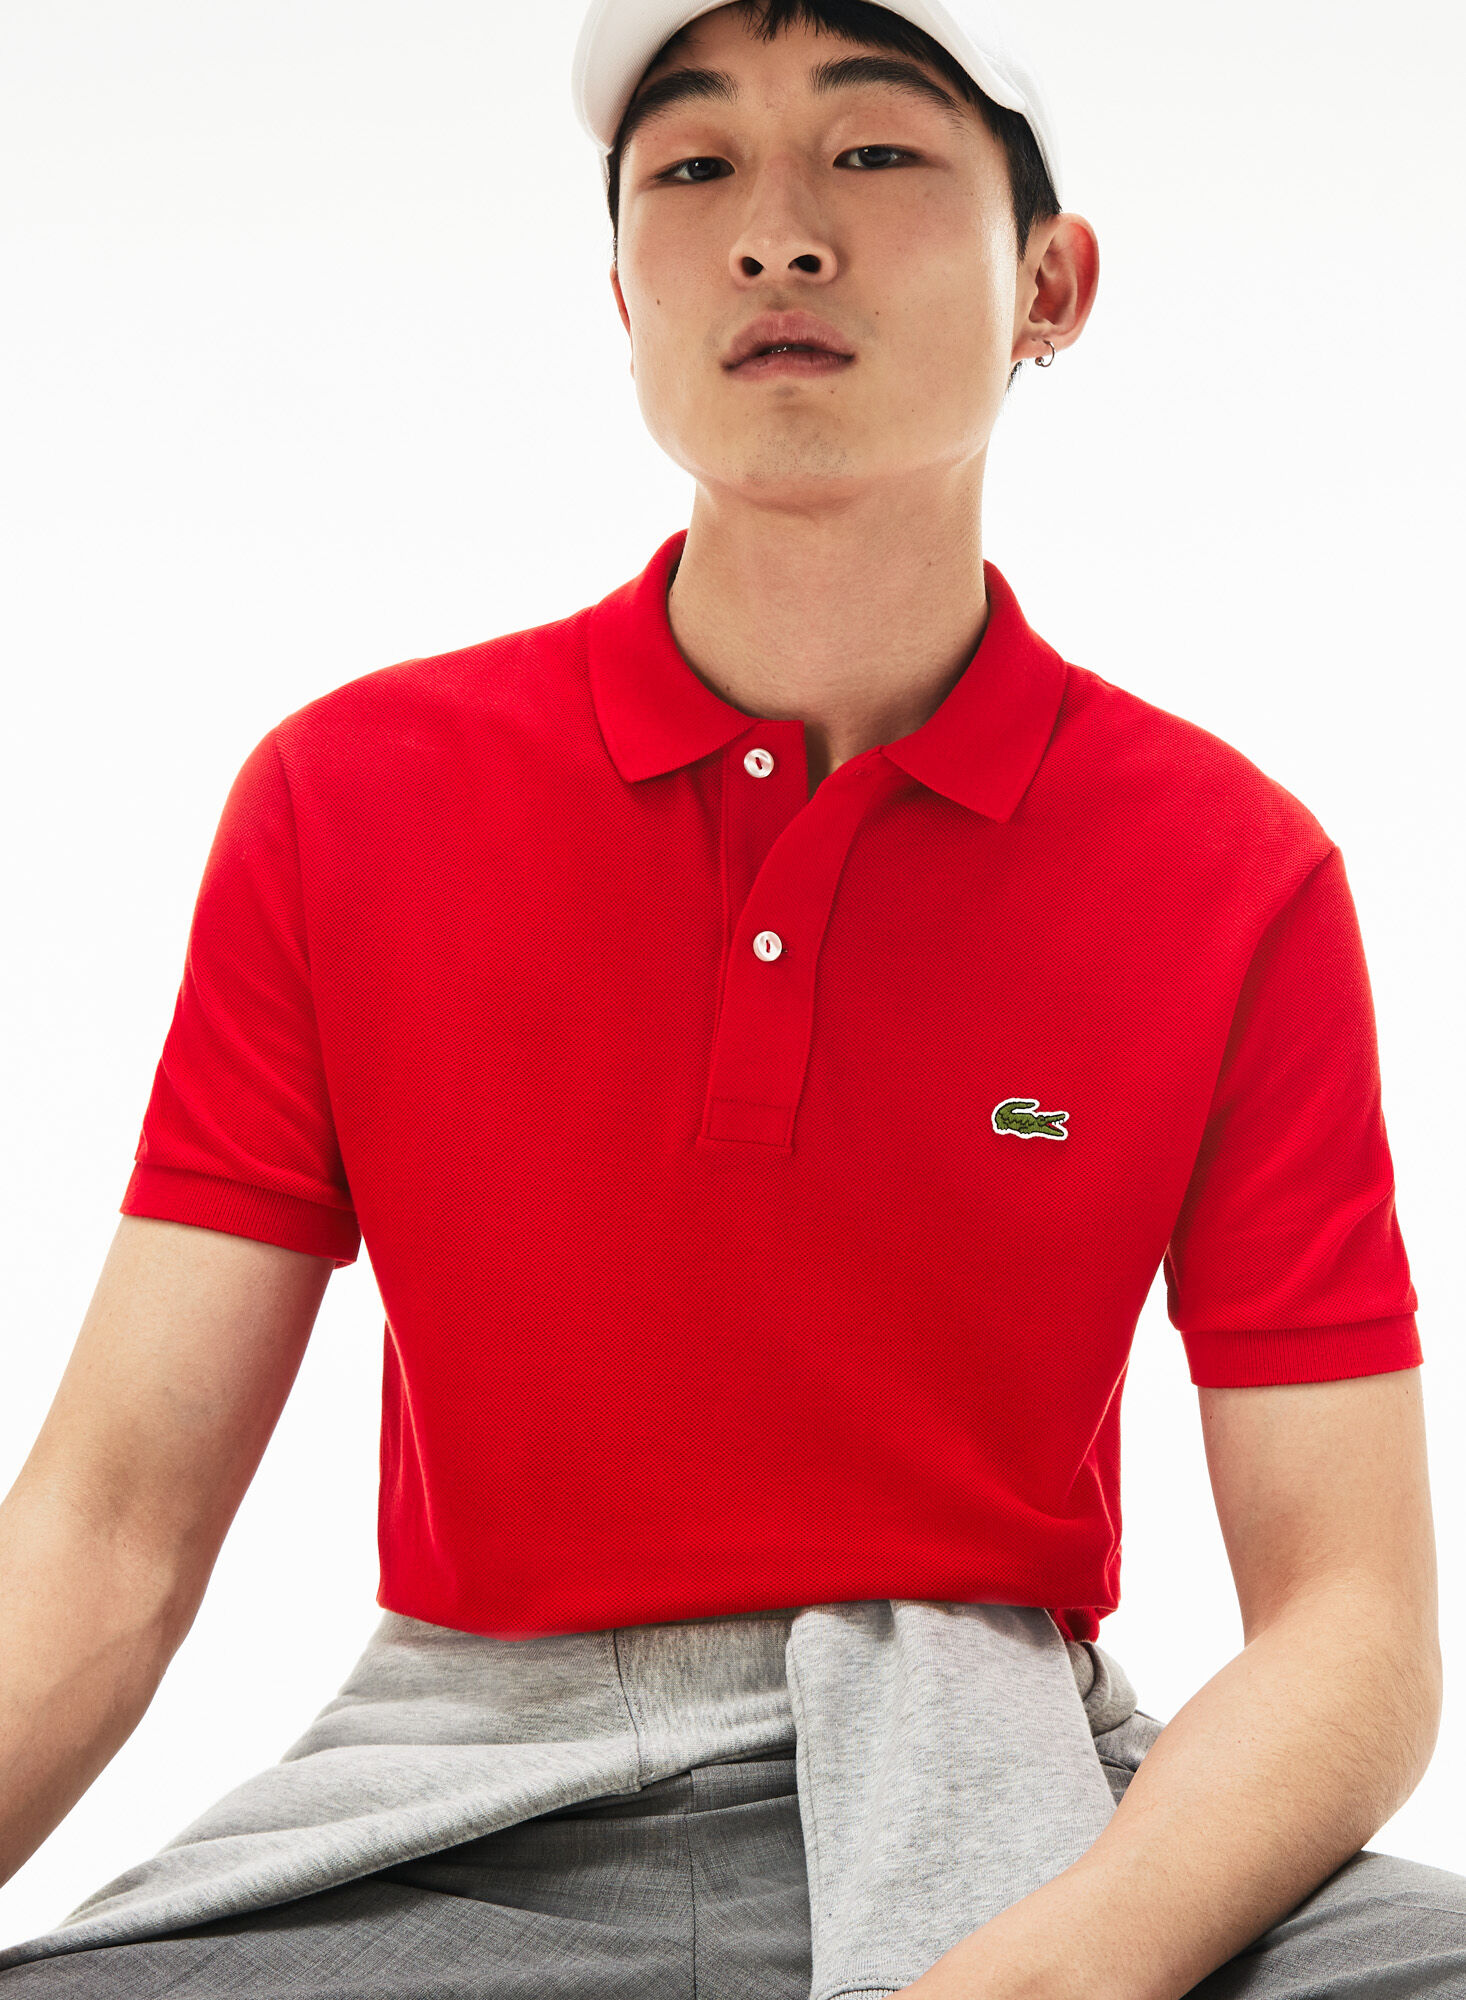 lacoste t shirt price in uae